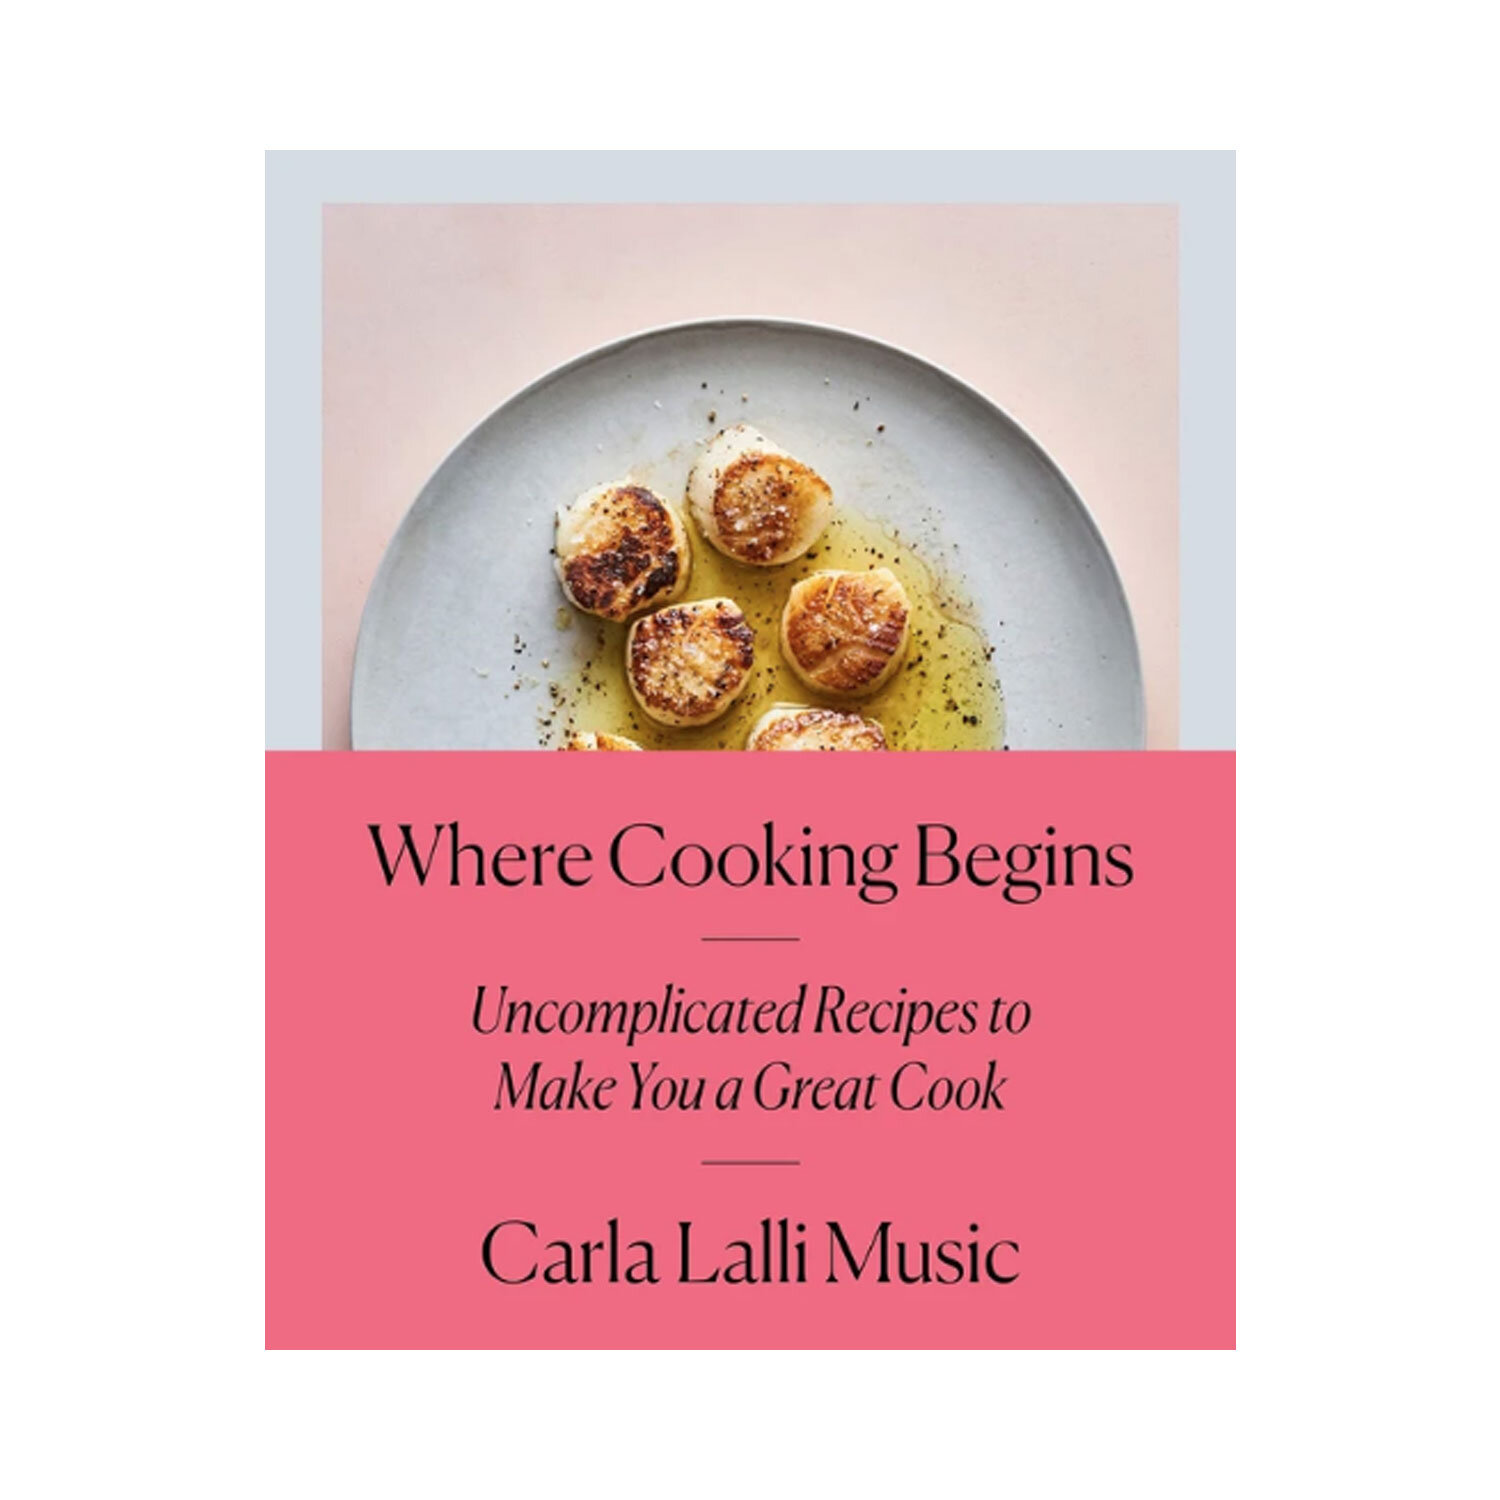 Archestratus: Where Cooking Begins with Carla Lalli Music, May 14